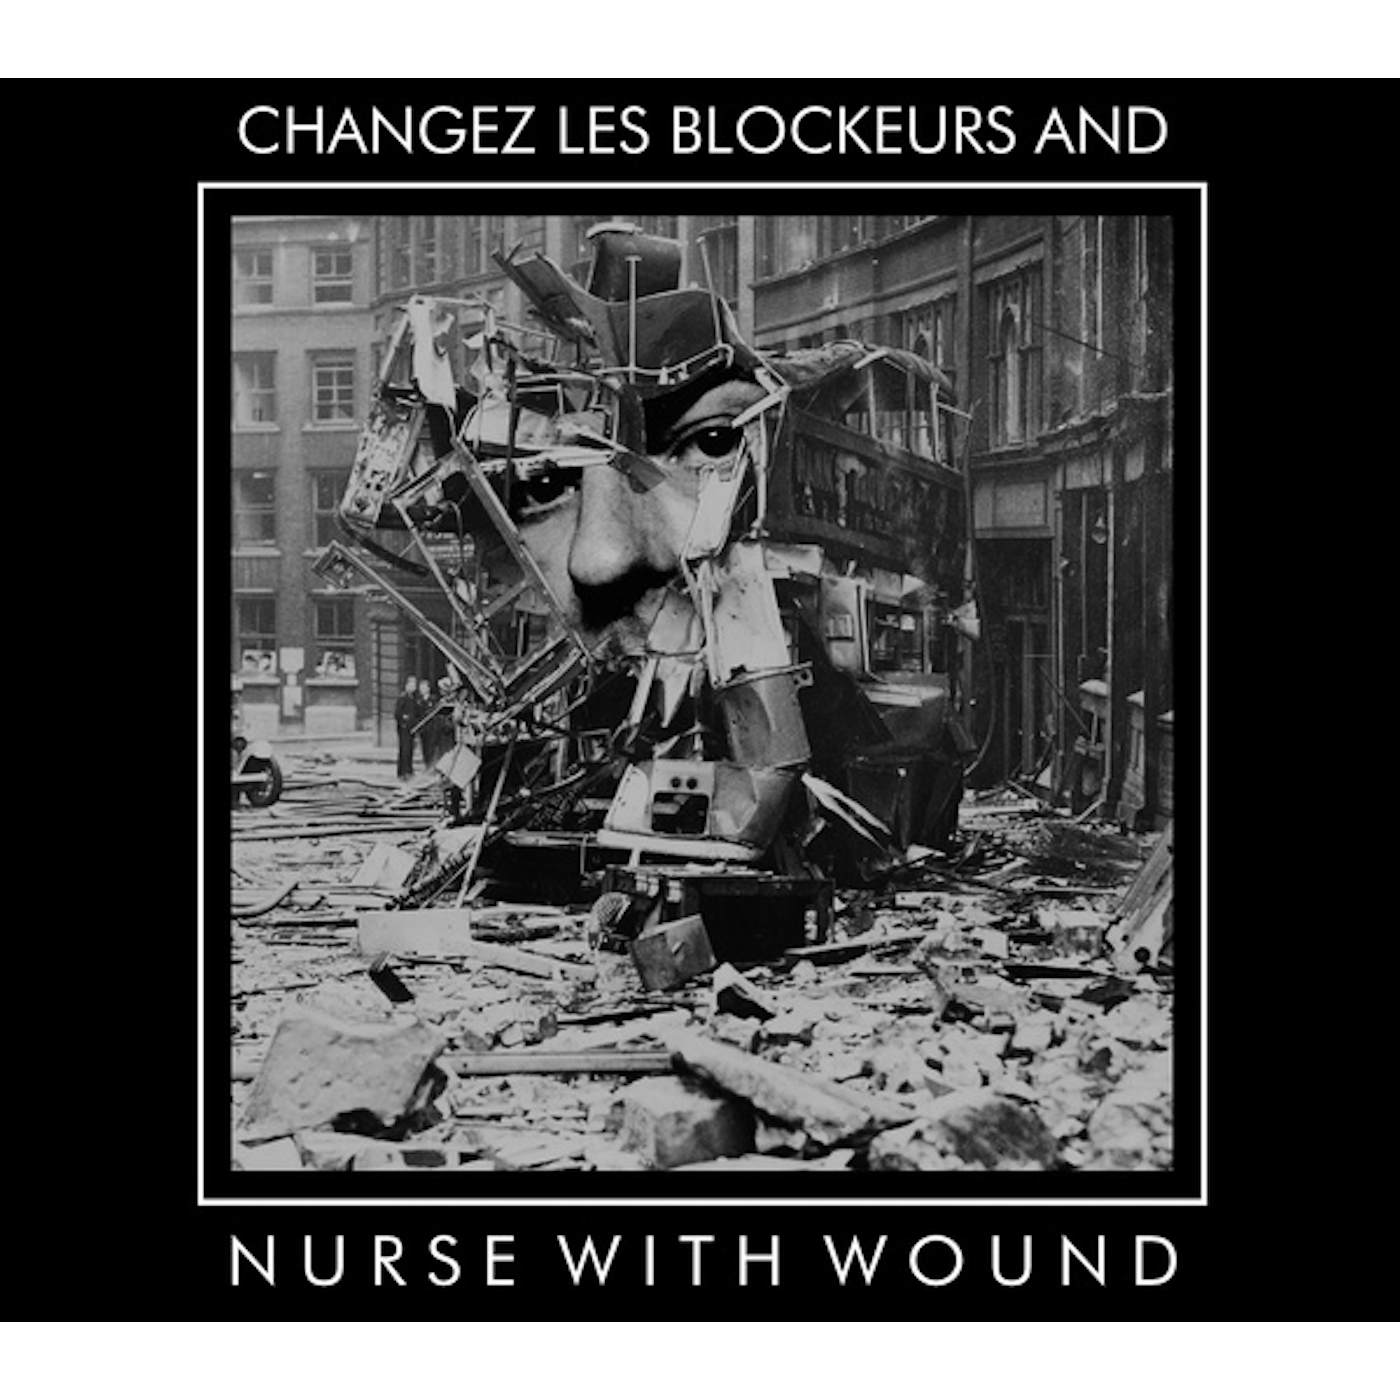 Nurse With Wound NWW PLAY CHANGEZ LES BLOCKEURS CD